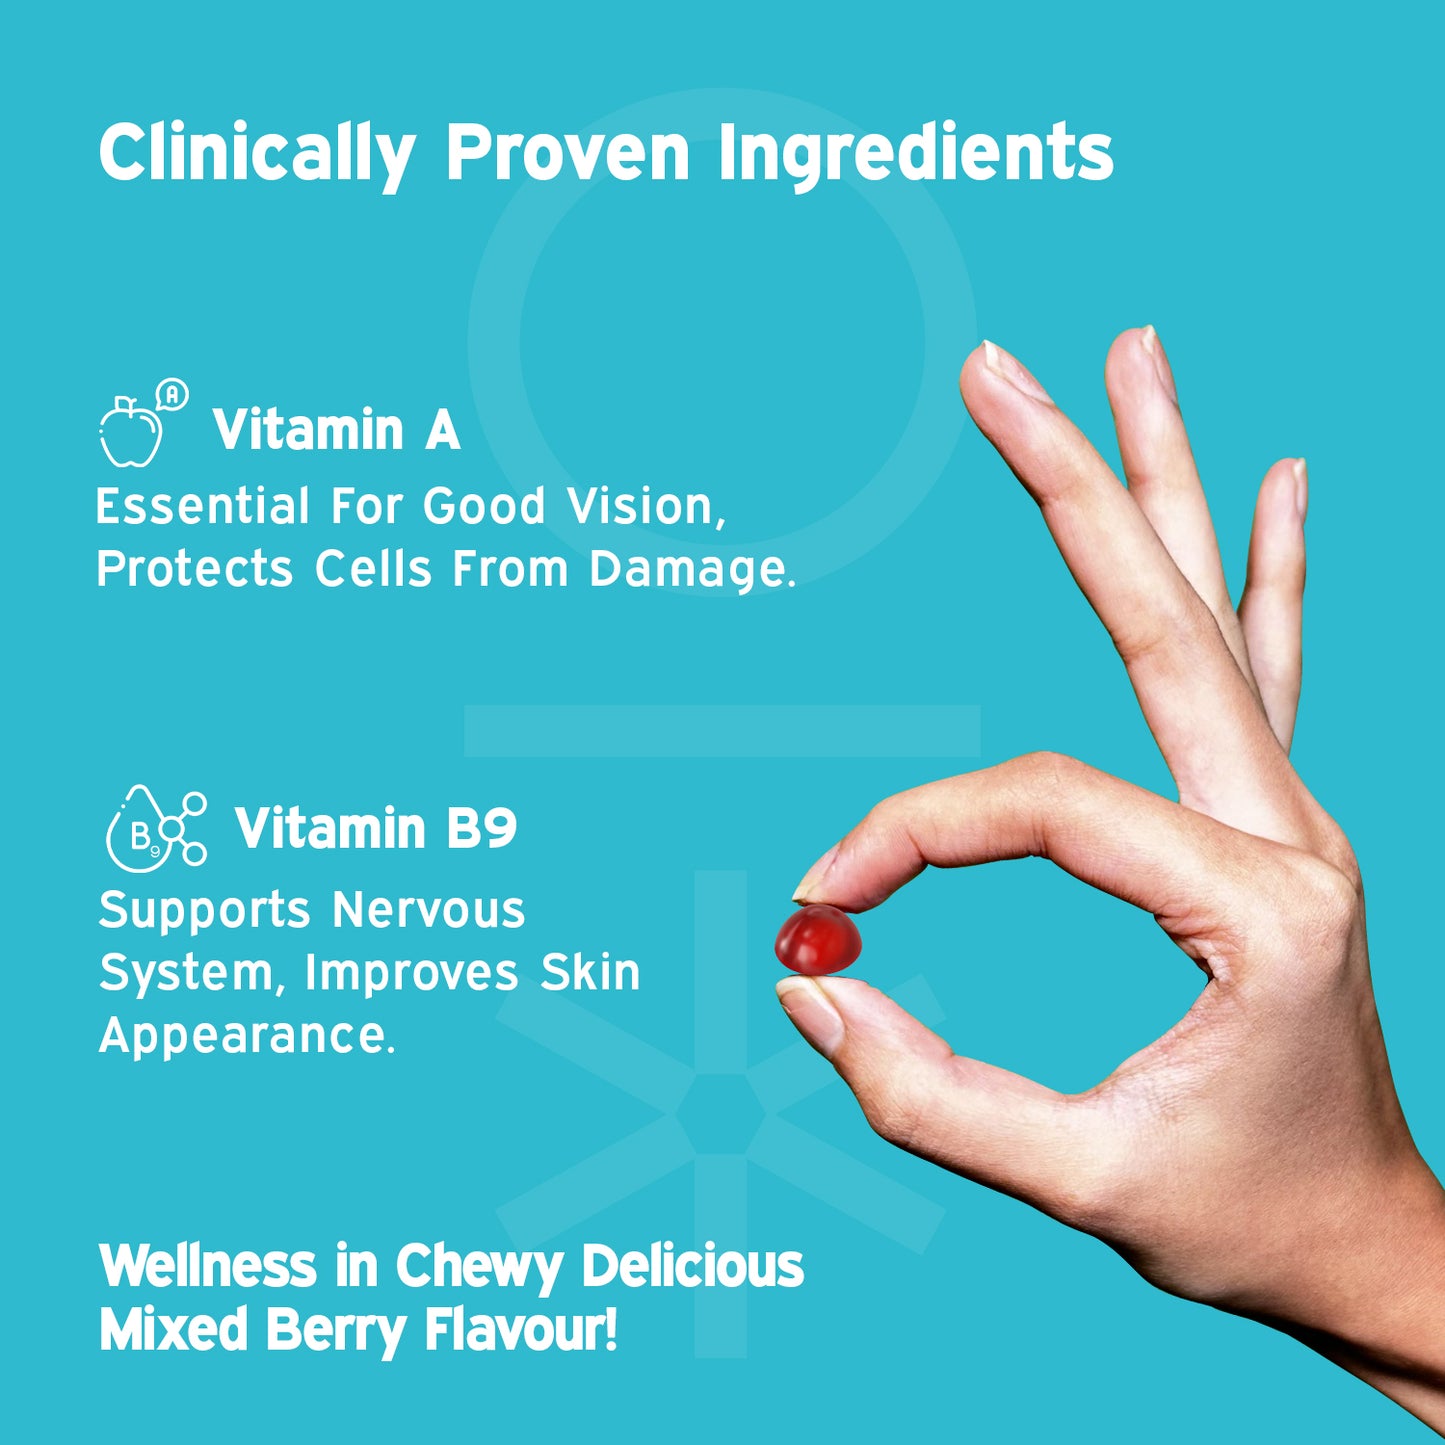 The Healthy Booster - Health & Vitality Multivitamin and Turmeric Ultra Gummies Combo